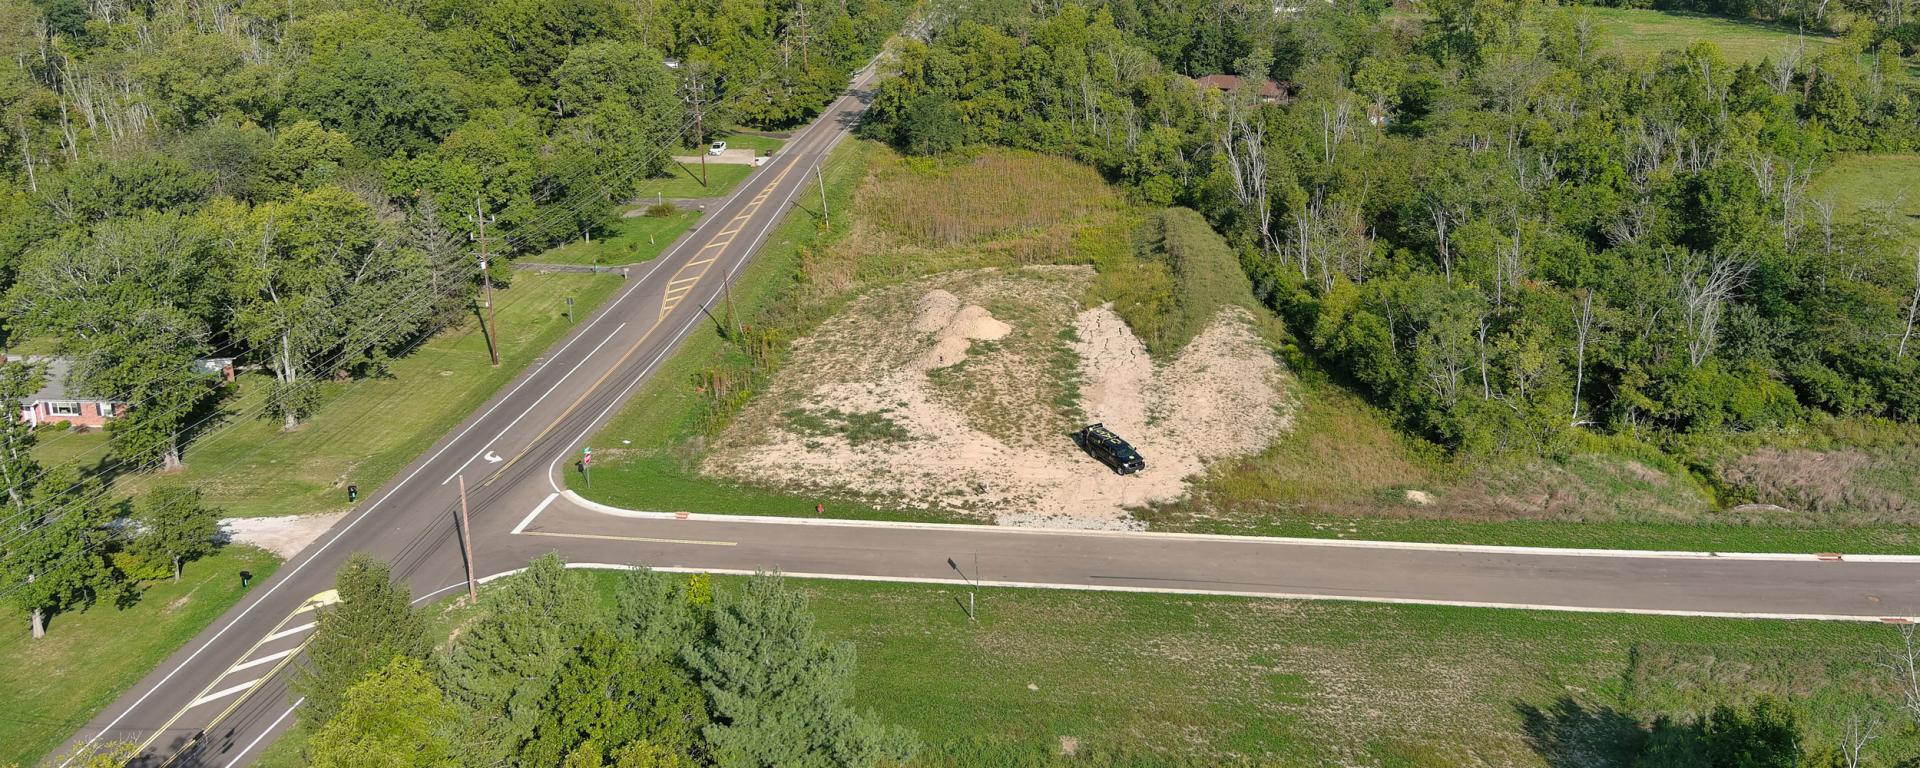 aerial photo of a new road intersection